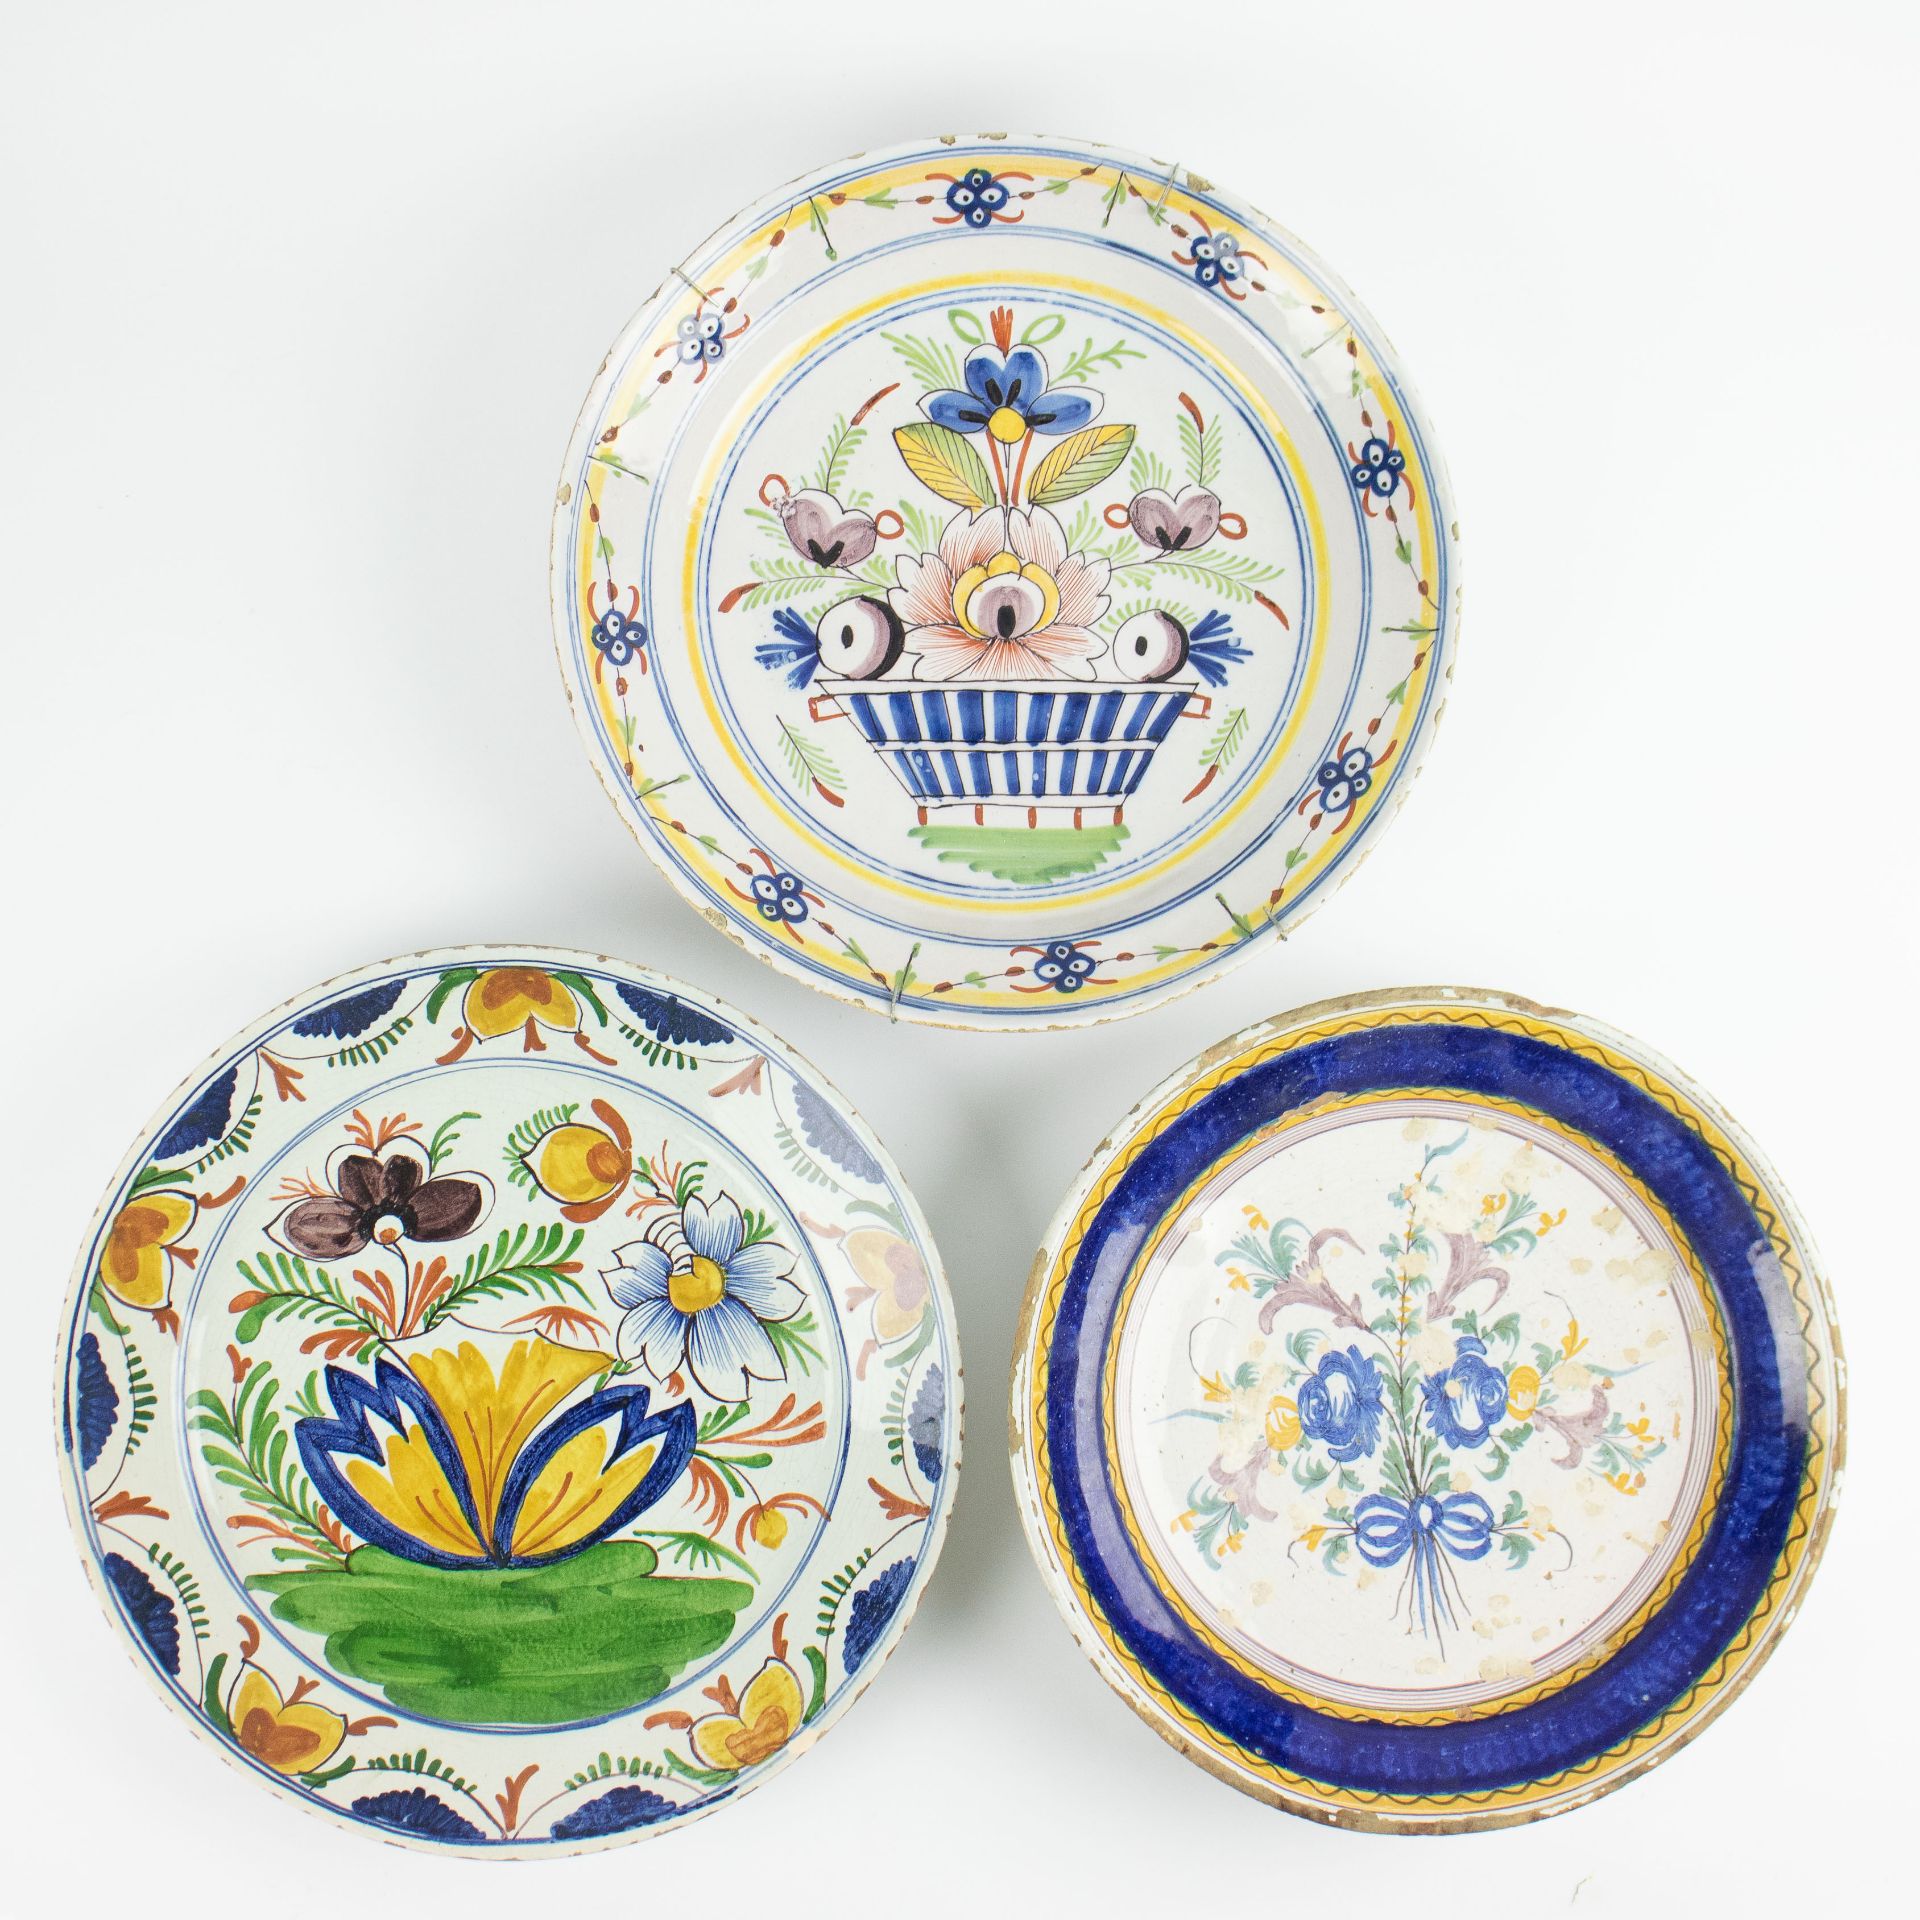 3 plates in Delft and Brussels earthenware